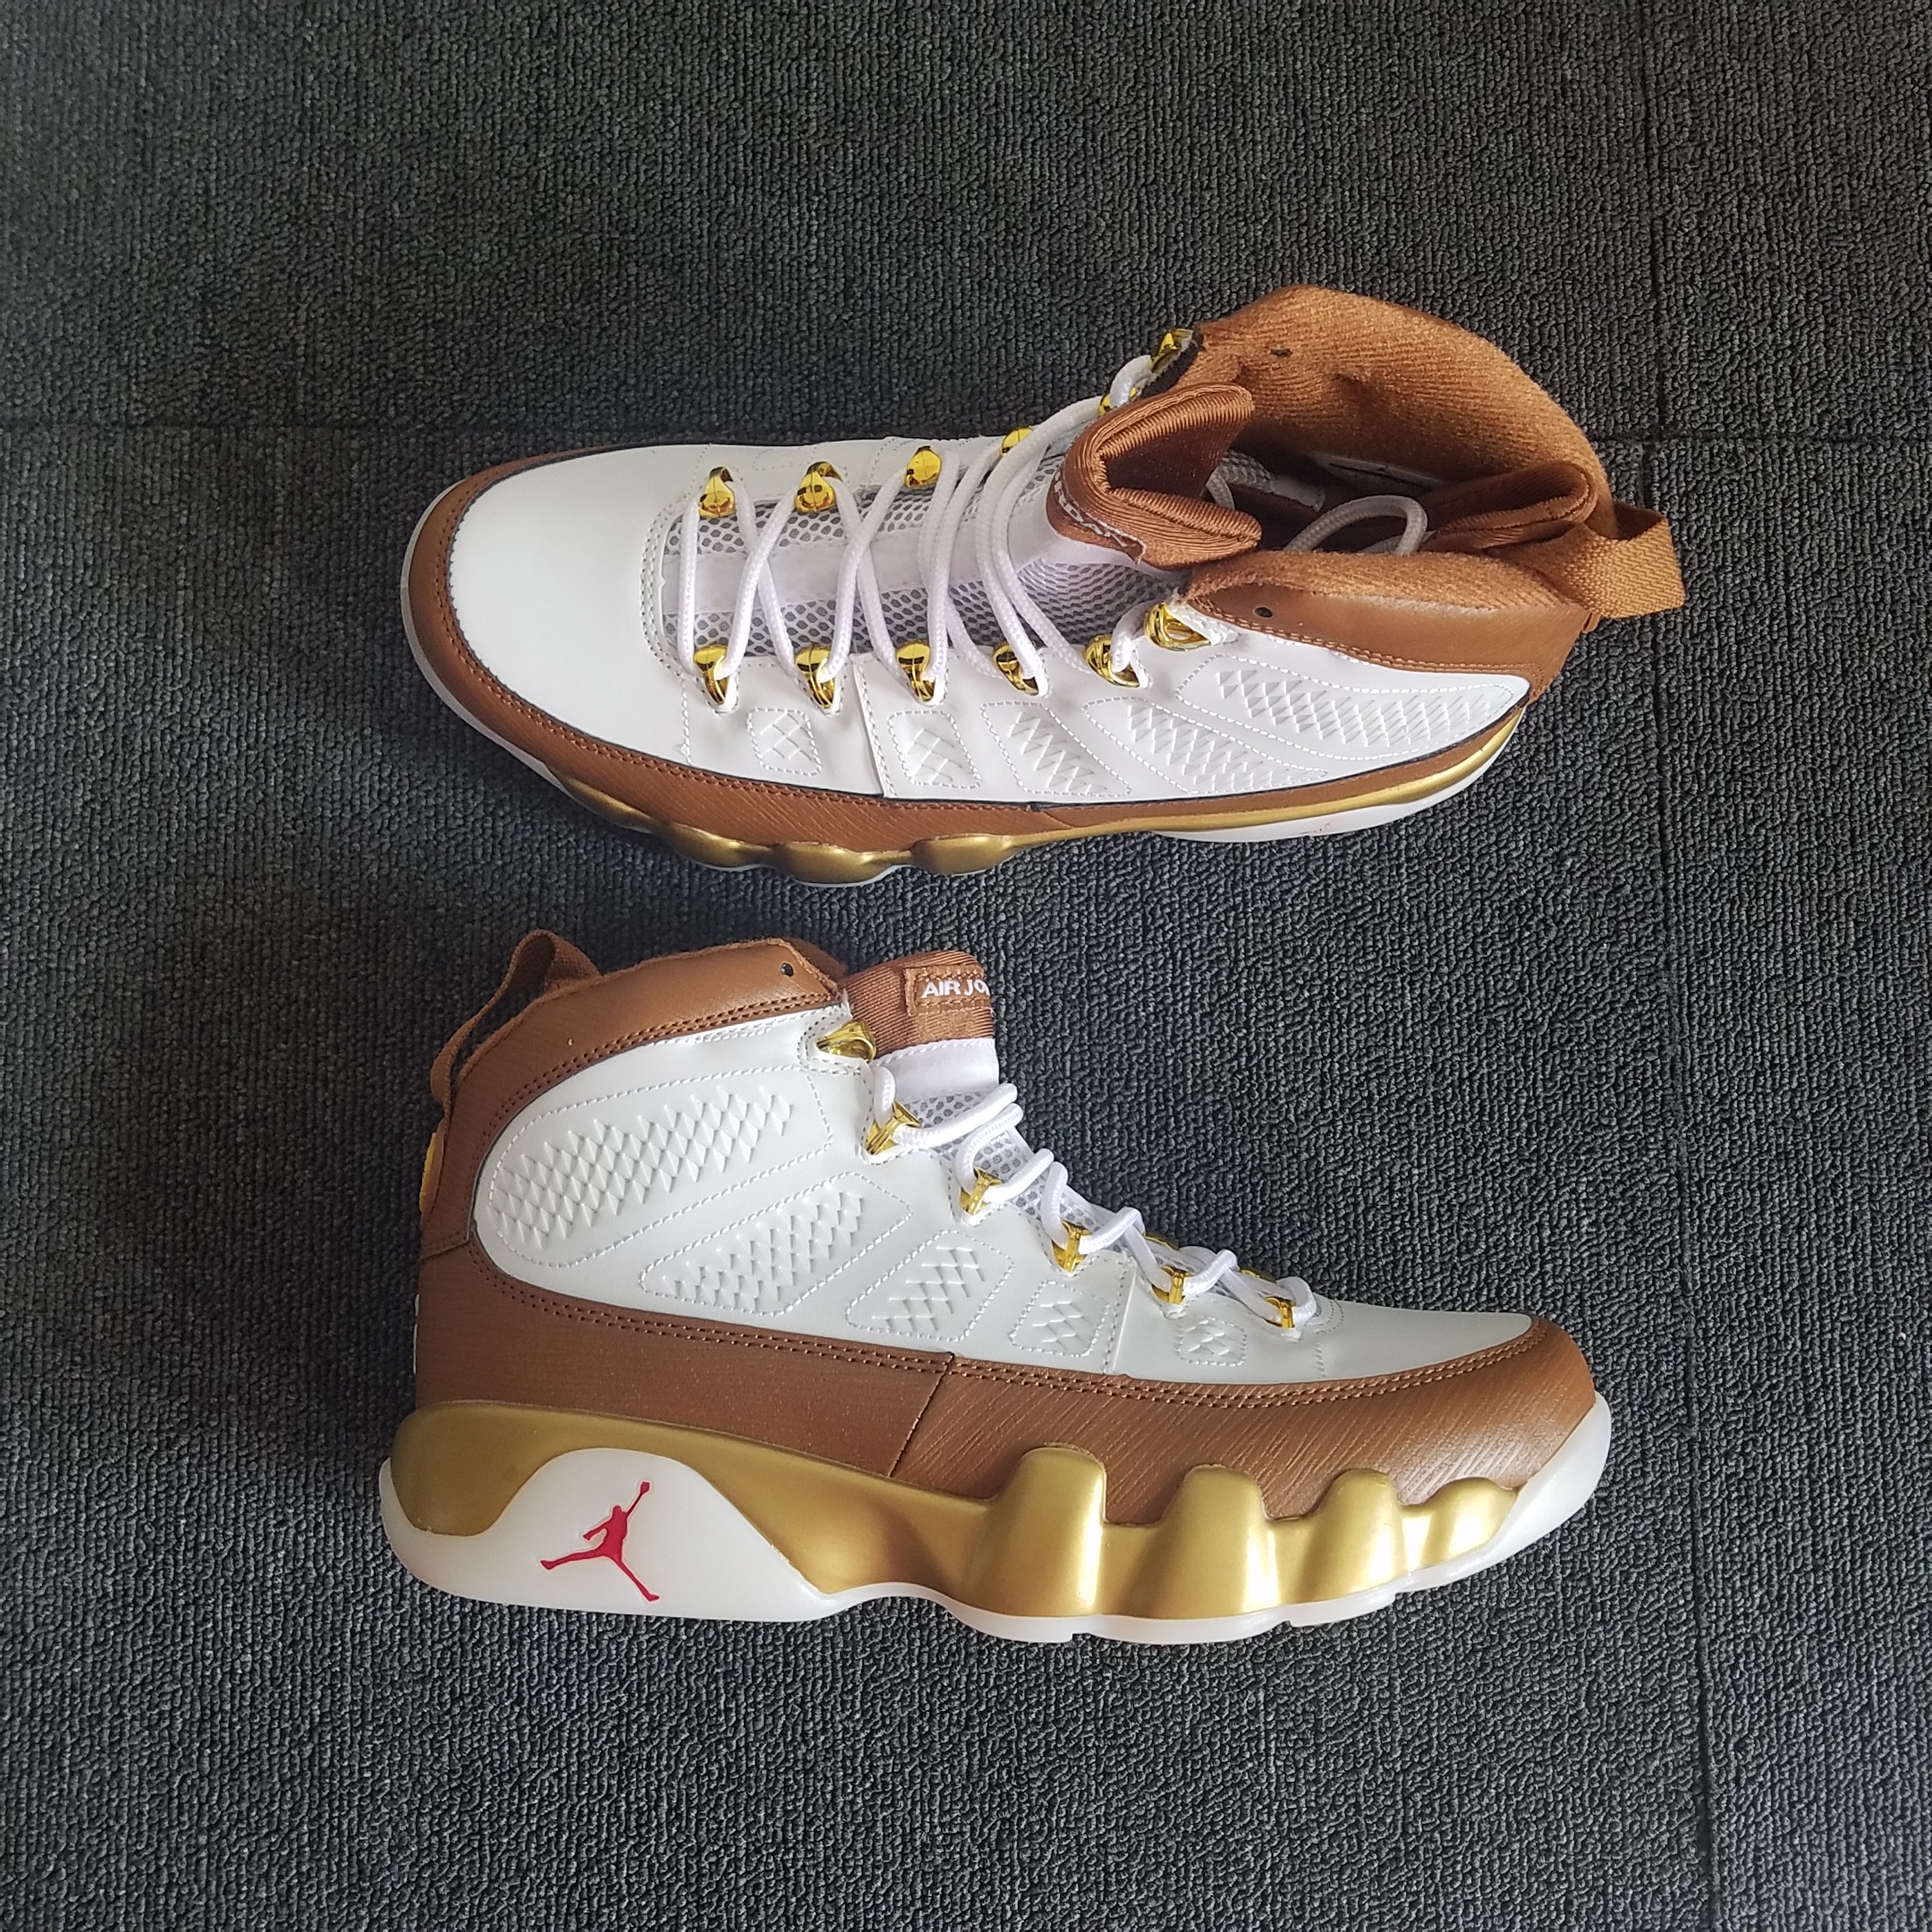 New Air Jordan 9 Retro White Brown Gold Shoes - Click Image to Close